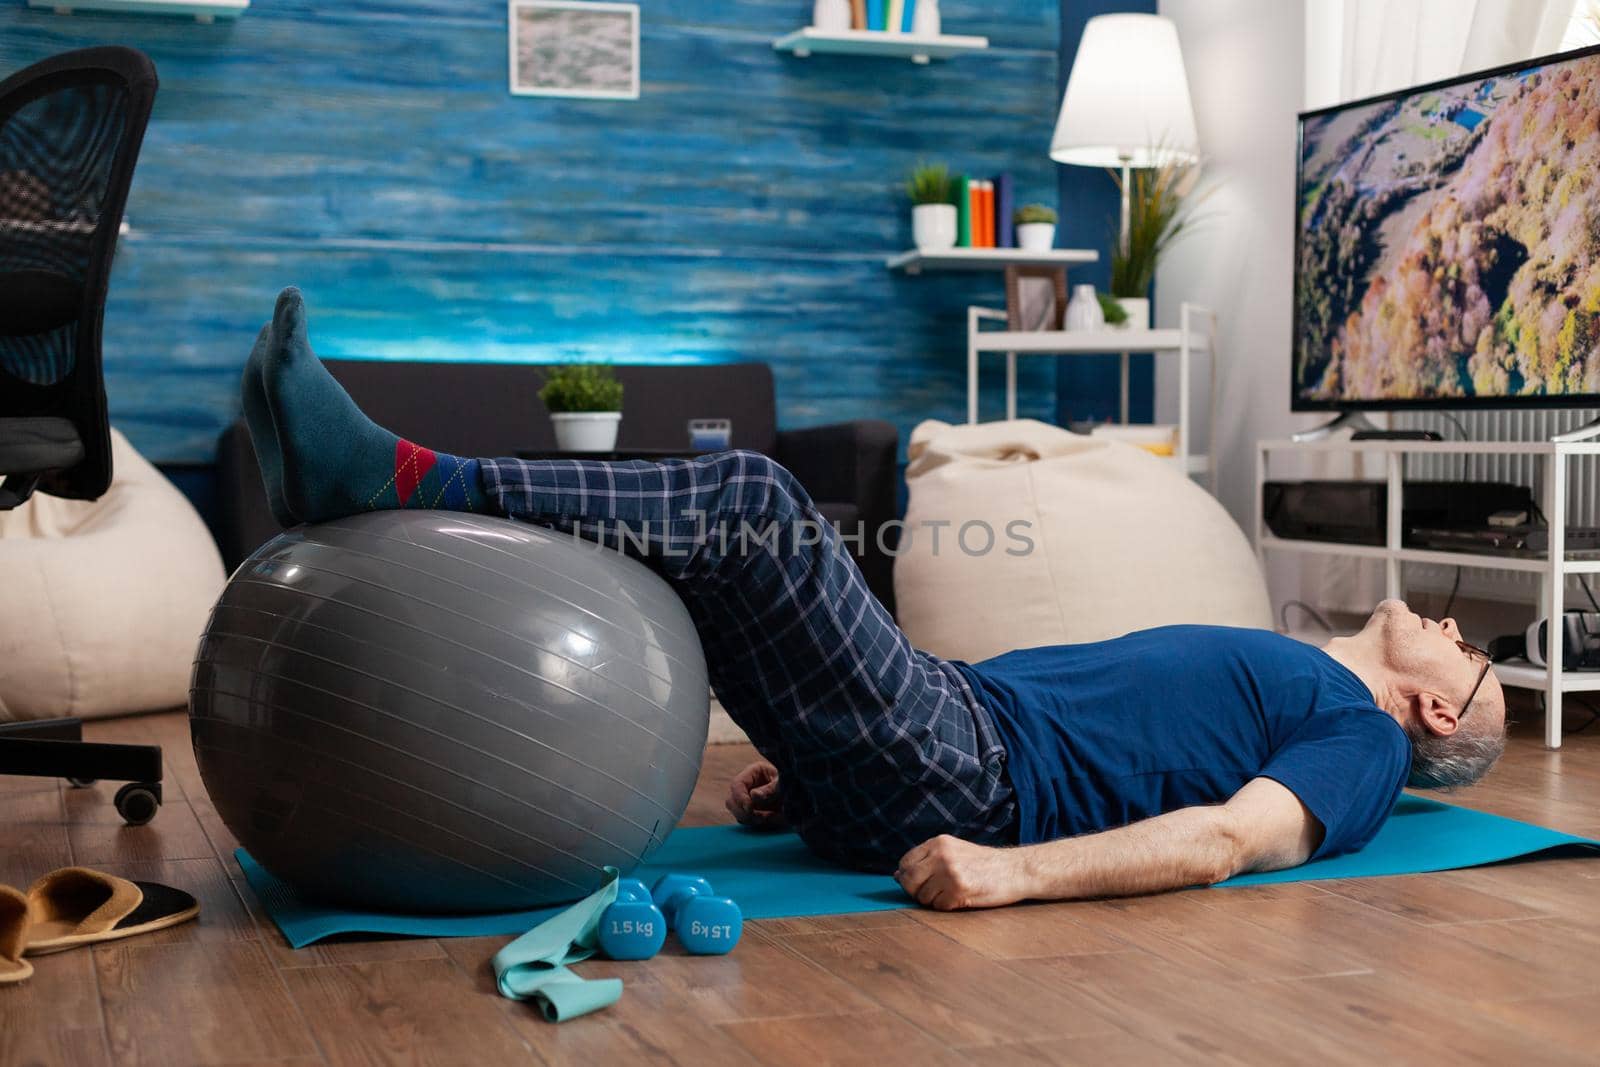 Retirement senior man doing wellness warming legs up using swiss ball sitting on yoga mat in living room. Retired pensioner practicing abdominals exercises working at body muscular healthcare